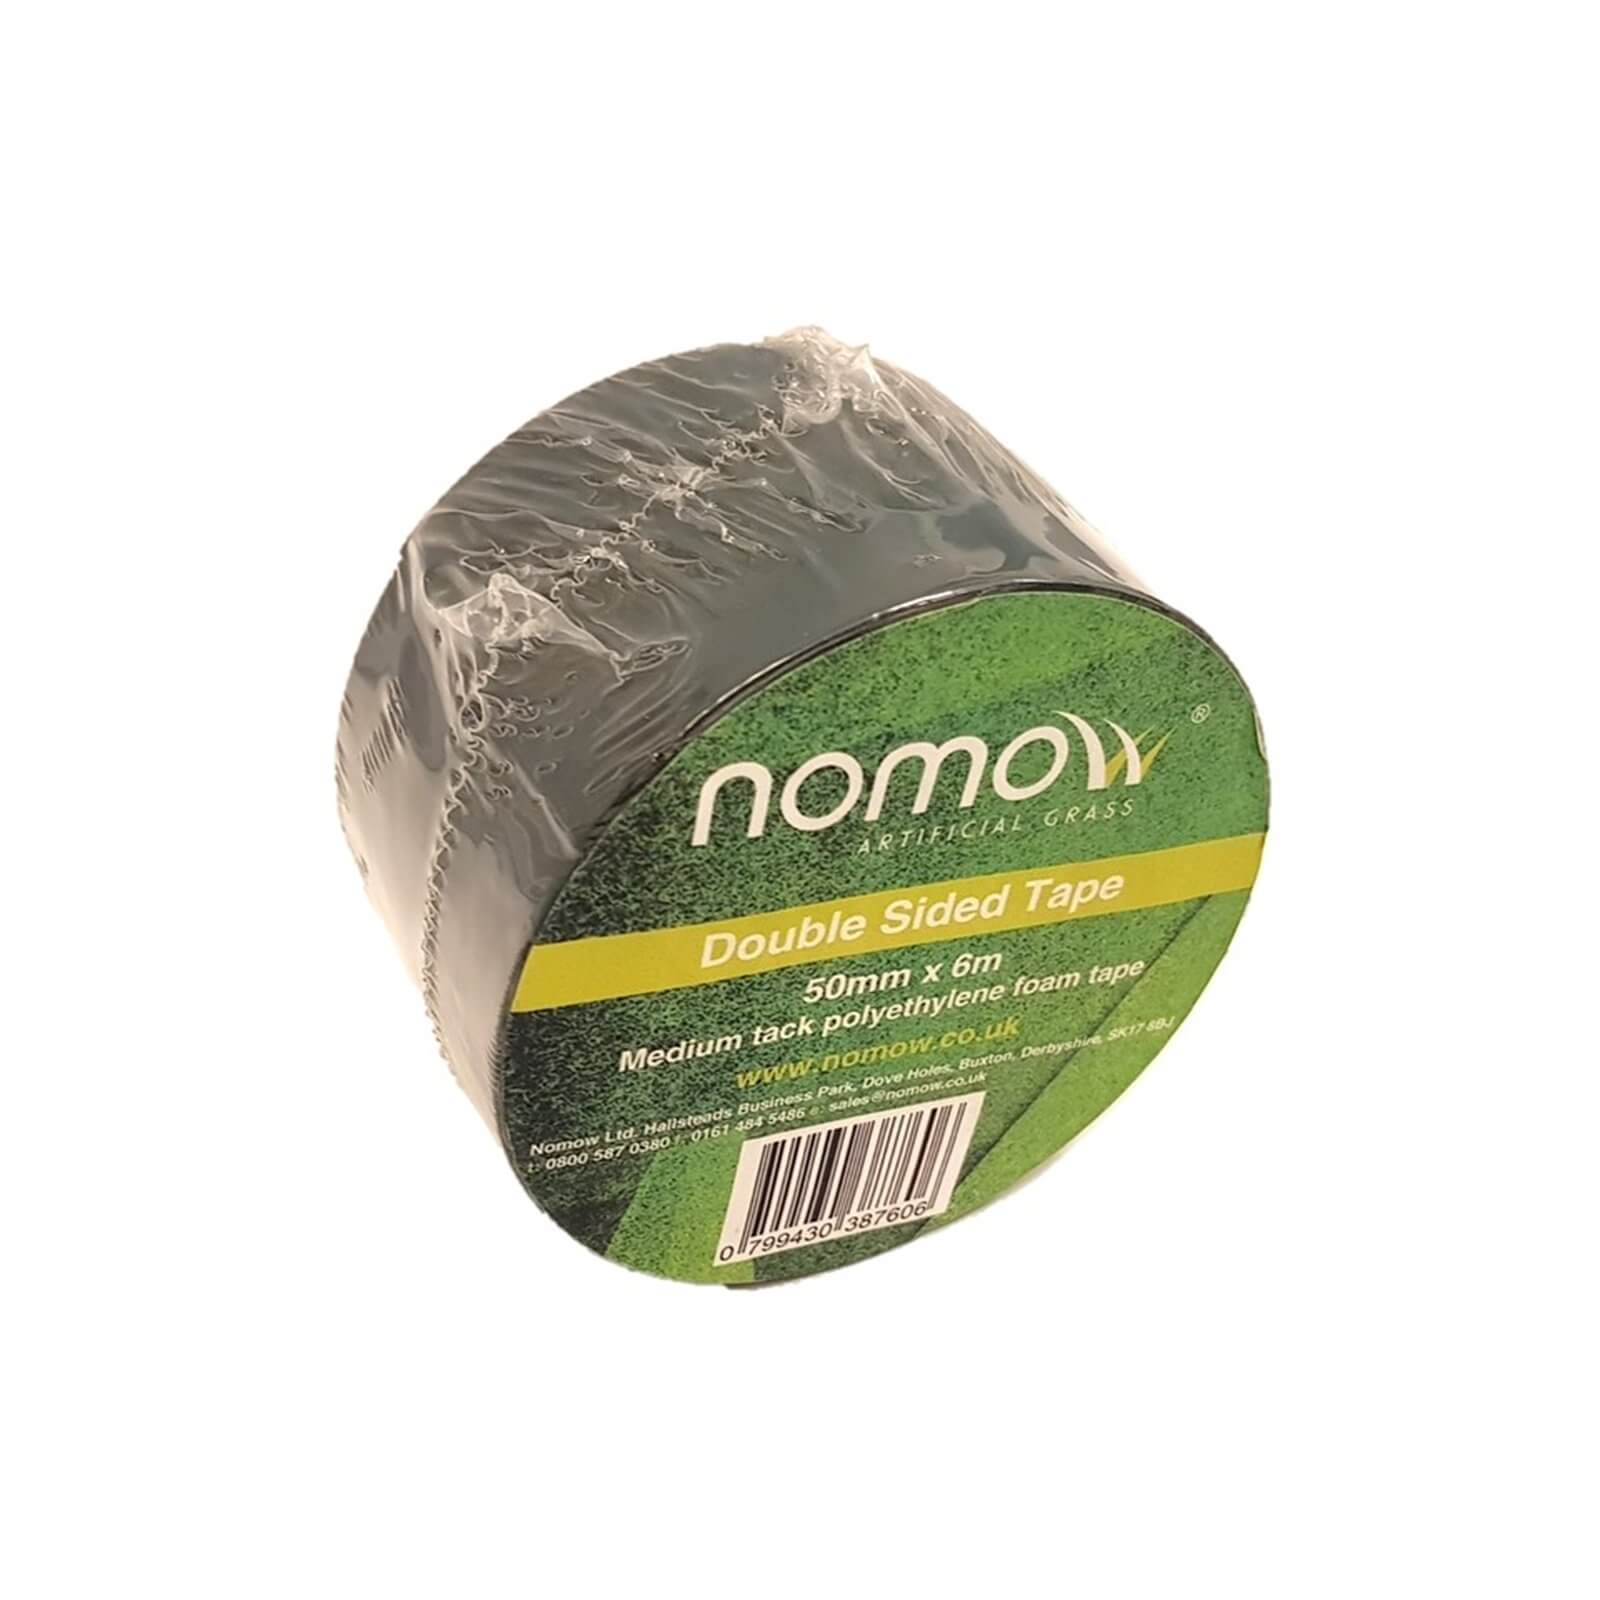 Photo of Double Sided Fixing Tape - 6m Artificial Grass Accessory